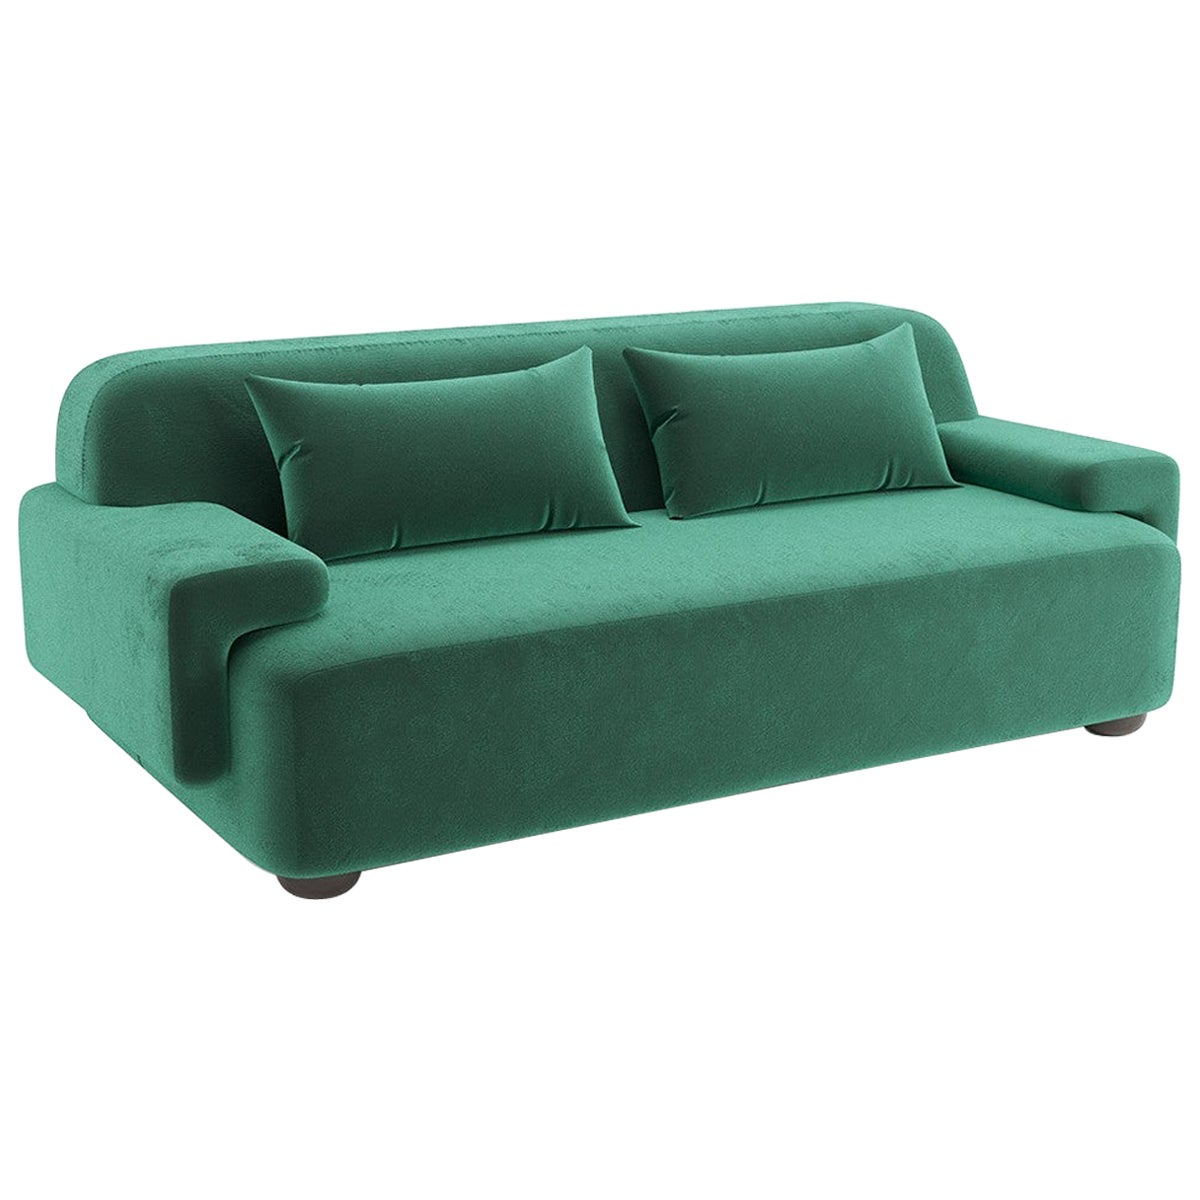 Popus Editions Lena 4 Seater Sofa in Green '772256' Como Velvet Upholstery For Sale